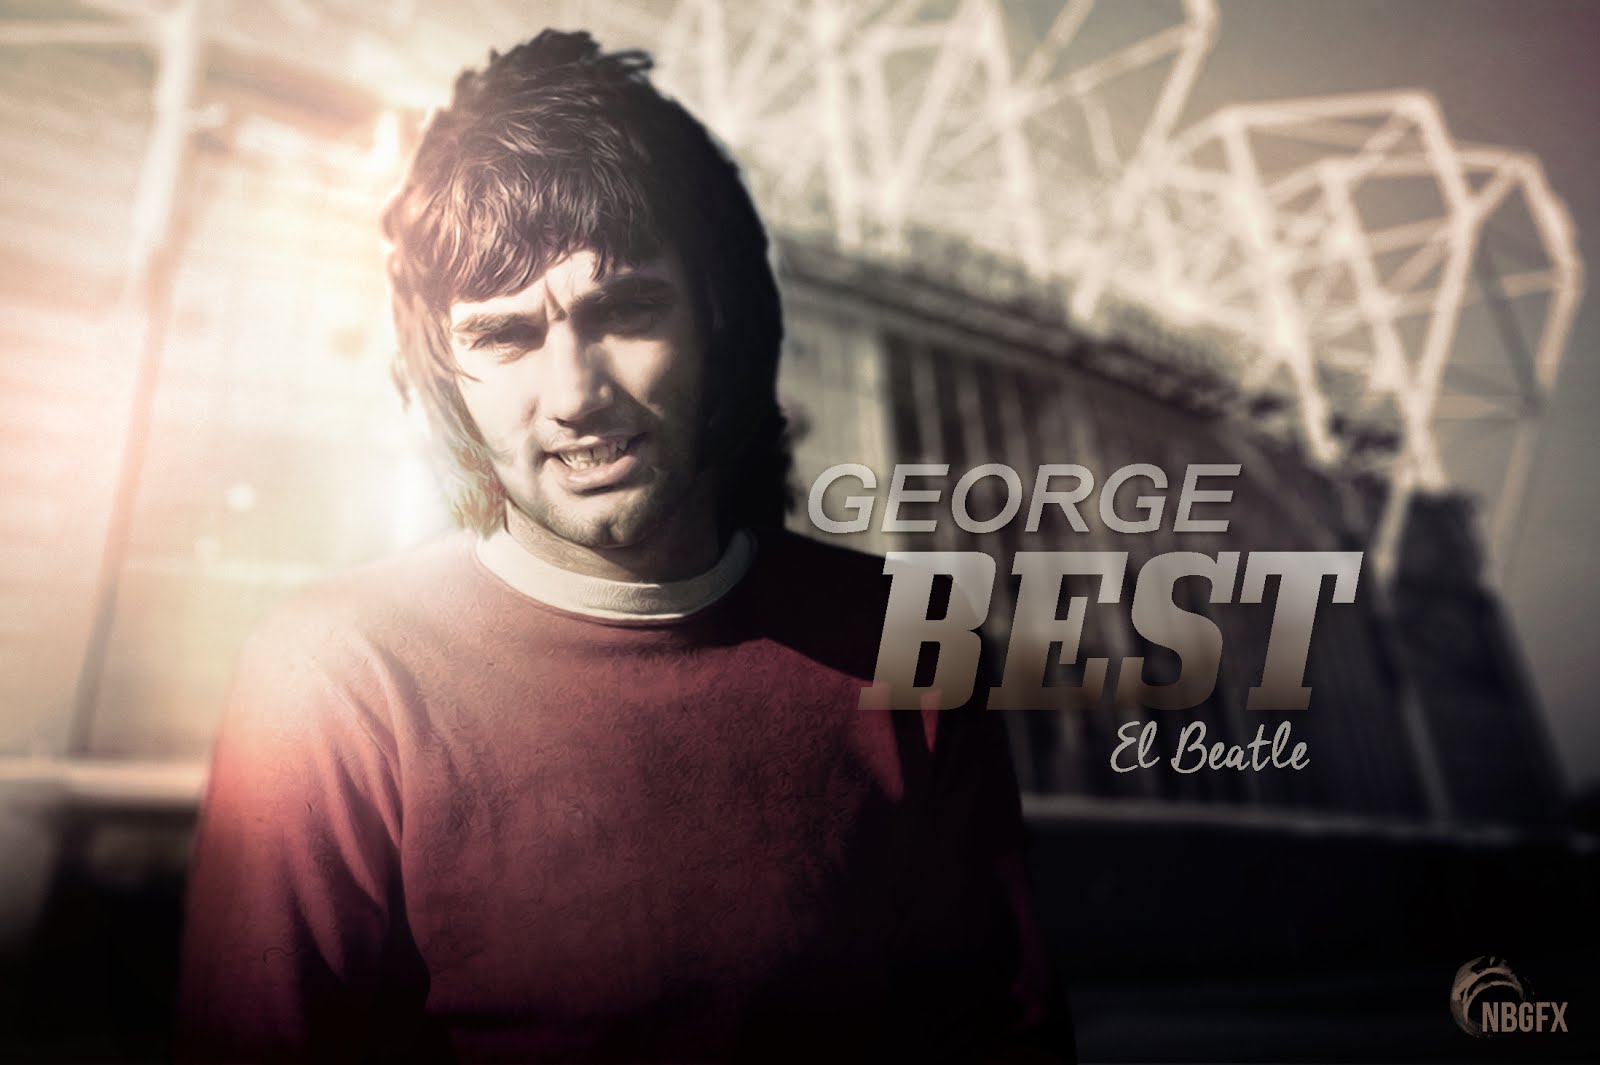 george best wallpaper,cool,font,music,photography,t shirt